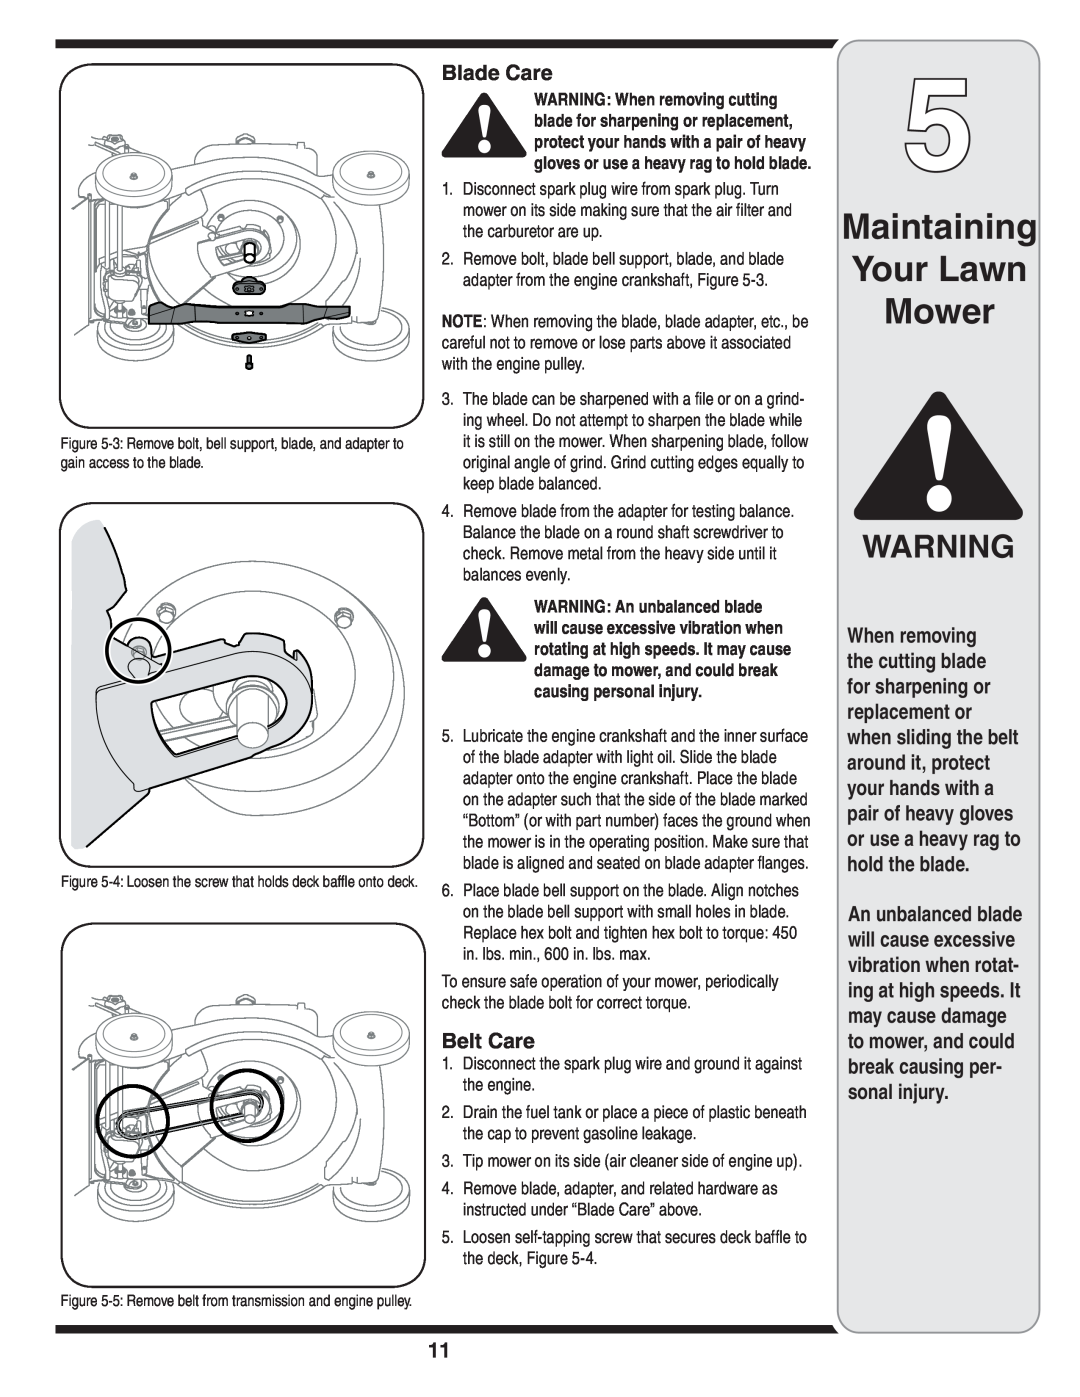 MTD 838 warranty Blade Care, Belt Care, Maintaining Your Lawn Mower 